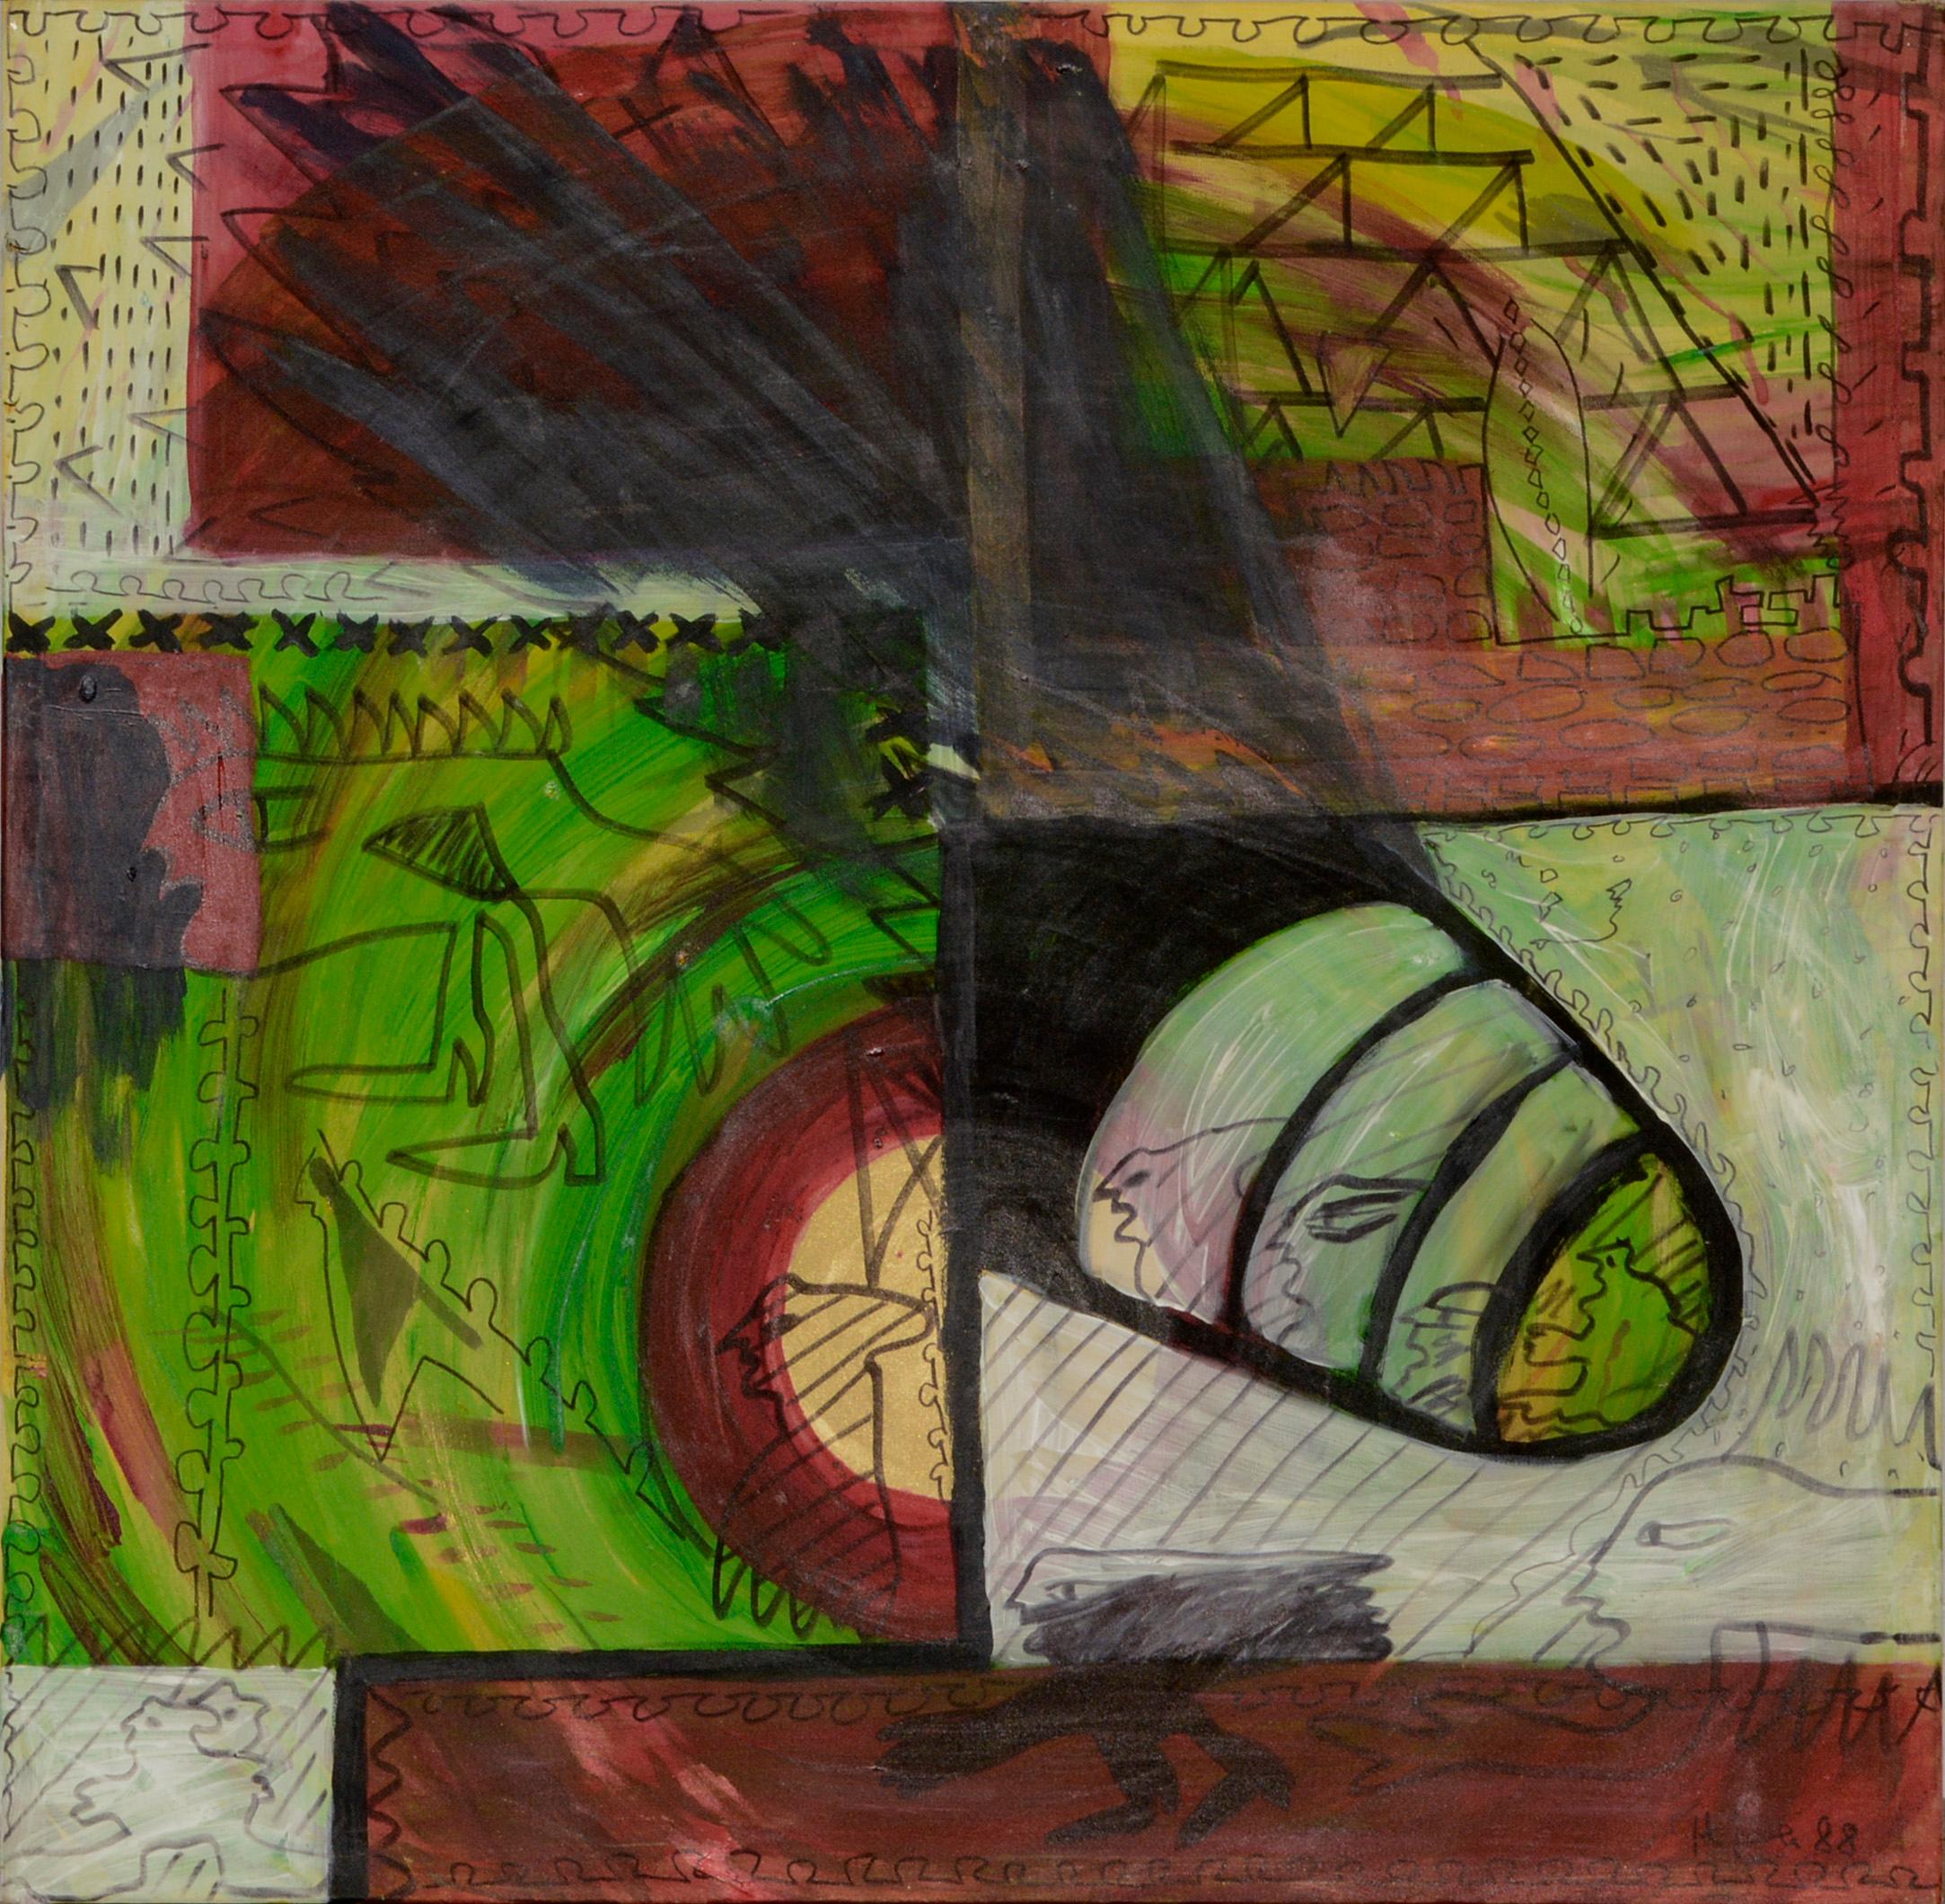 Unknown Abstract Painting - Abstract Expressionist Composition in Green, Red & Black